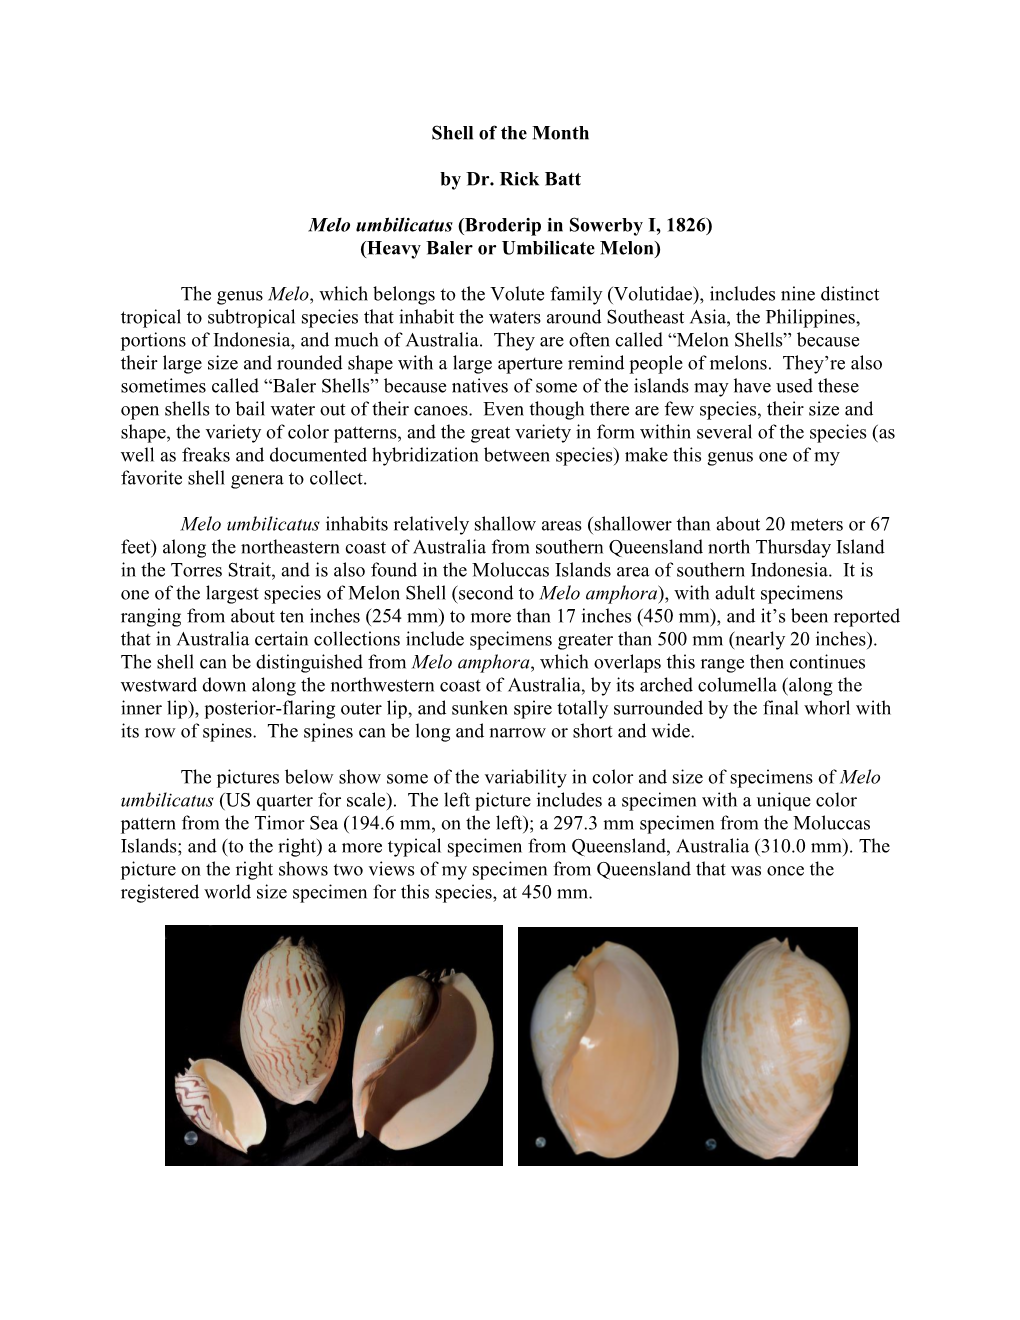 Shell of the Month by Dr. Rick Batt Melo Umbilicatus (Broderip In